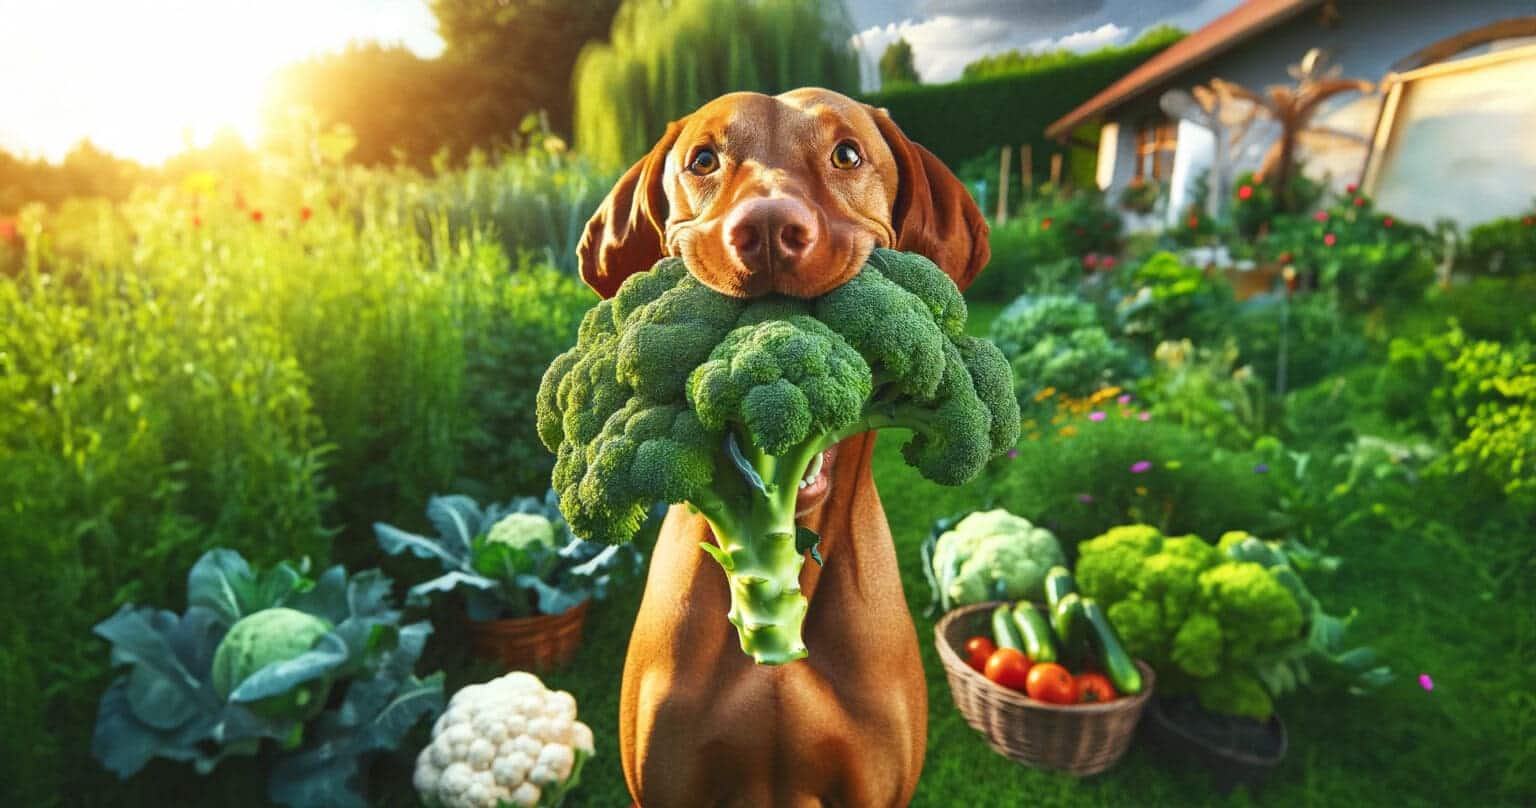 A dog is holding broccoli in his mouth.